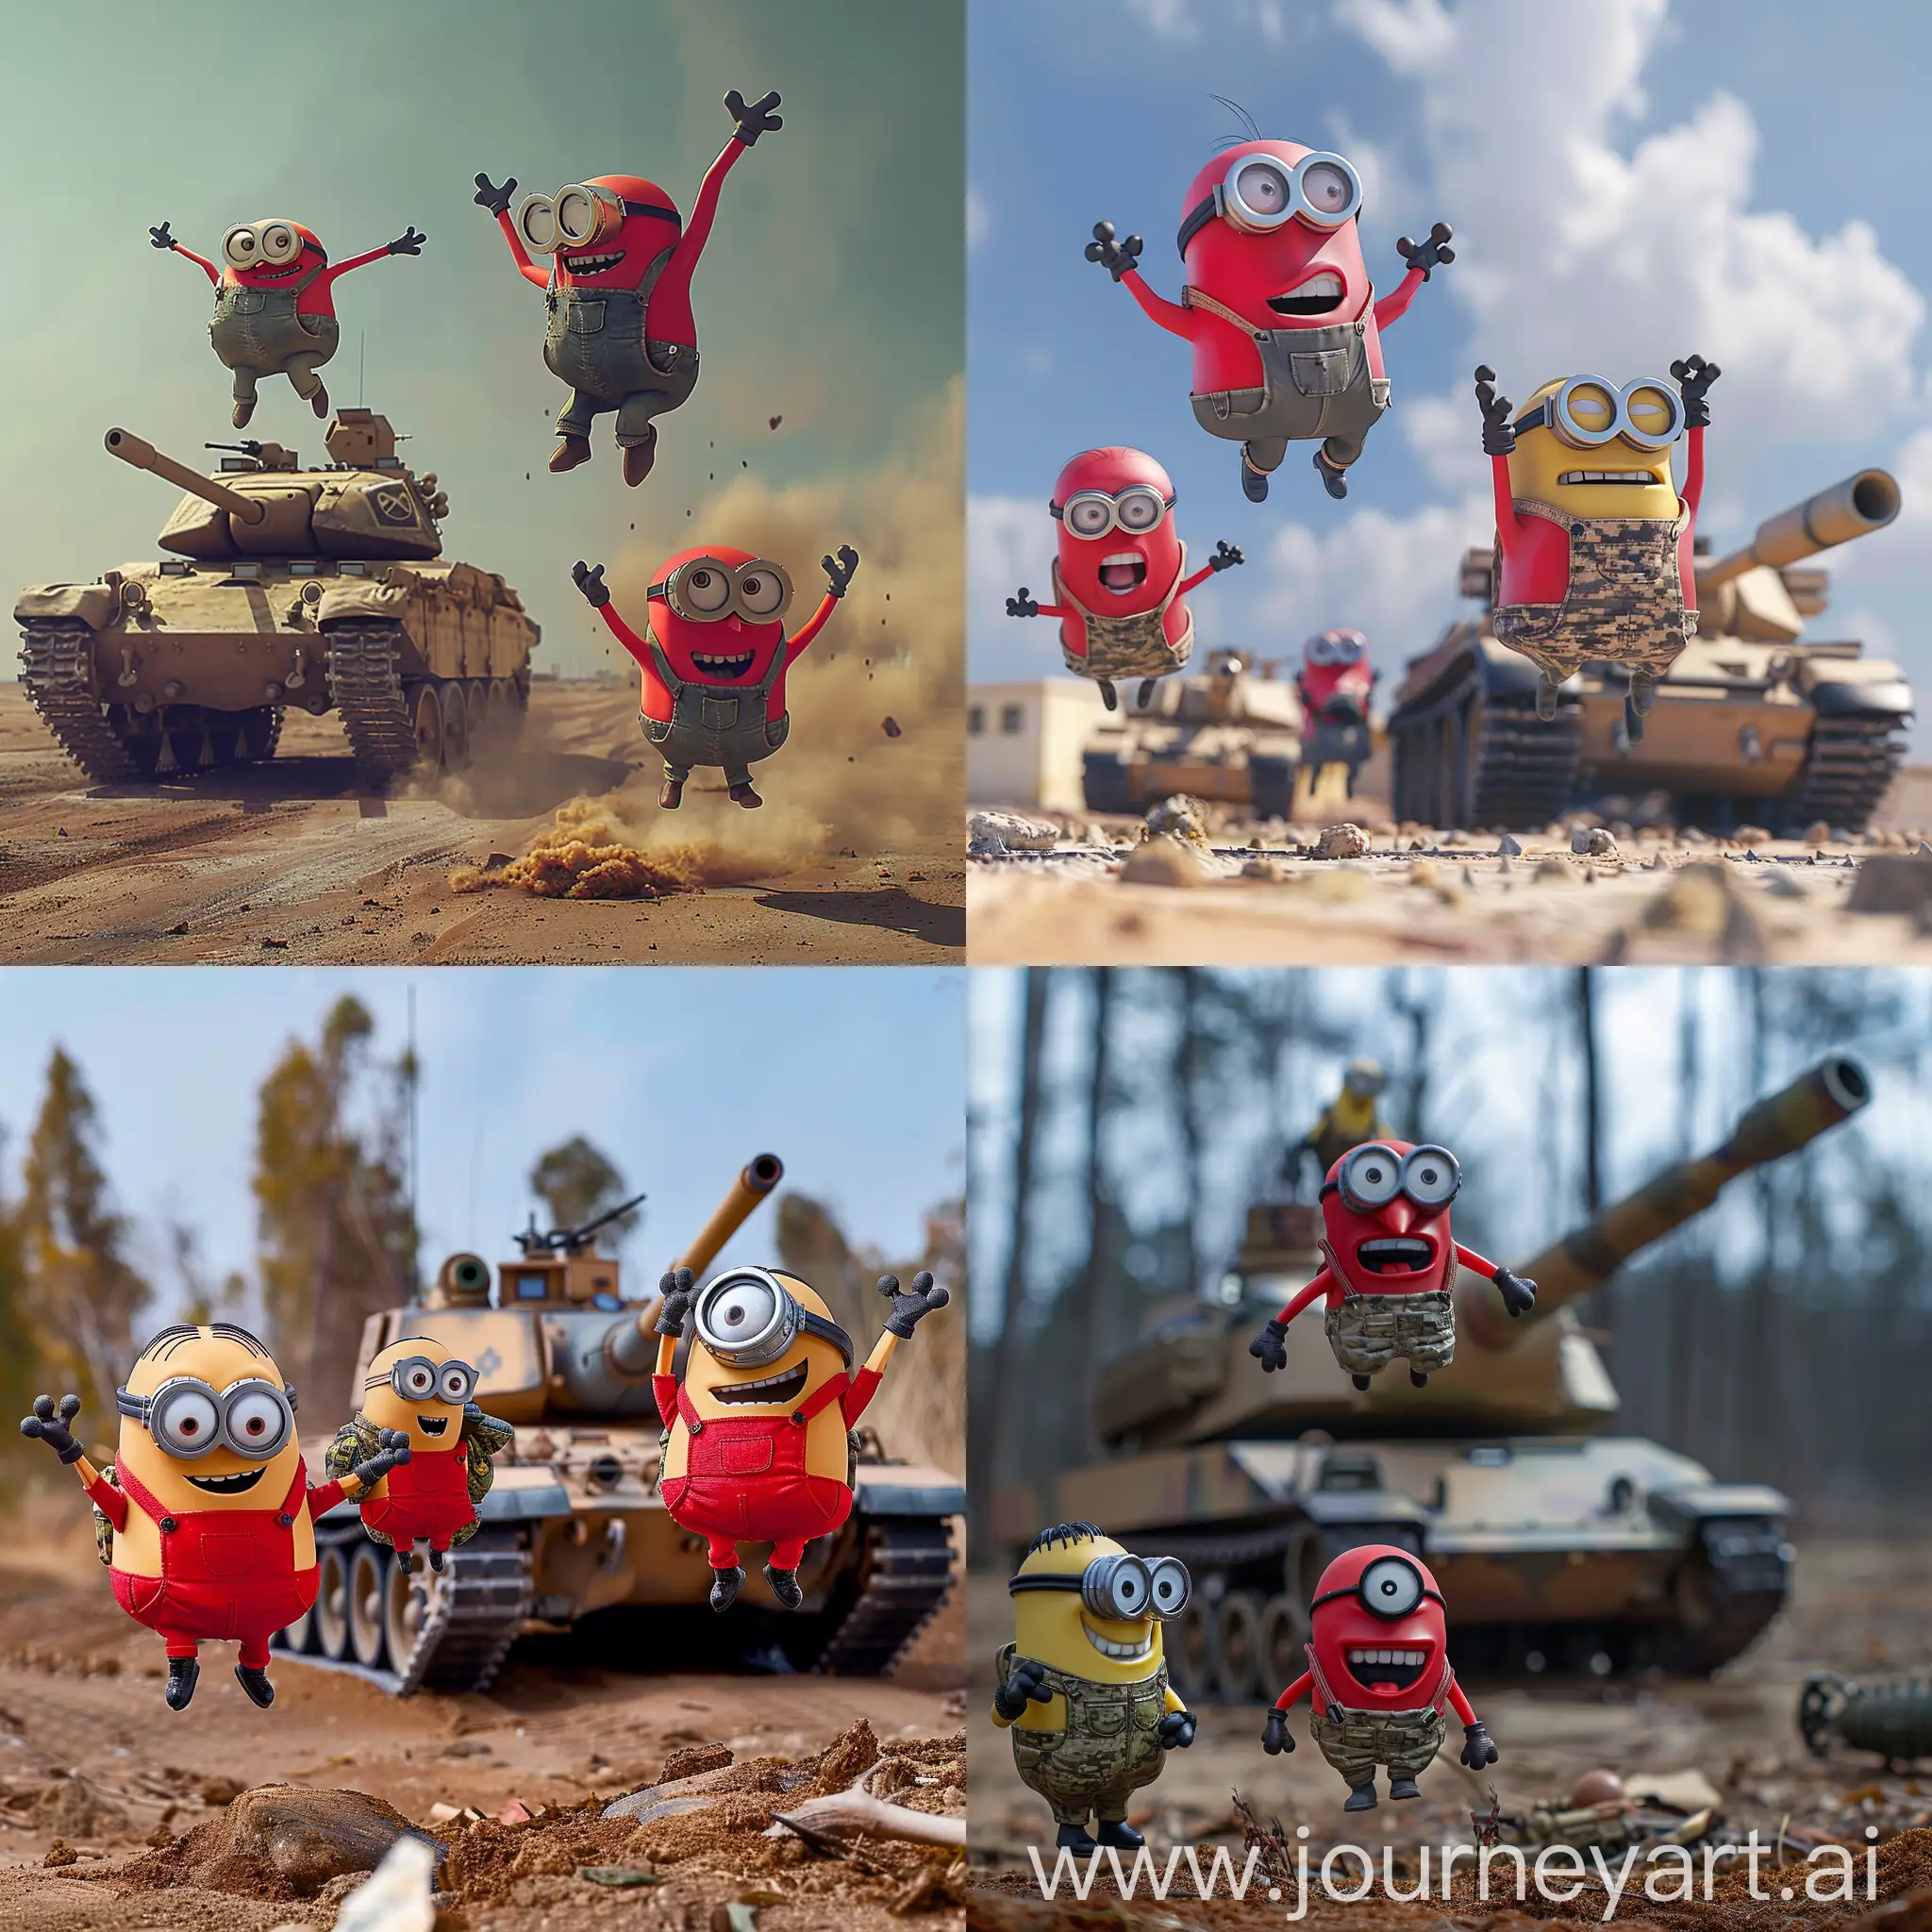 Red-Minions-in-Military-Uniform-Next-to-Tank-Jumping